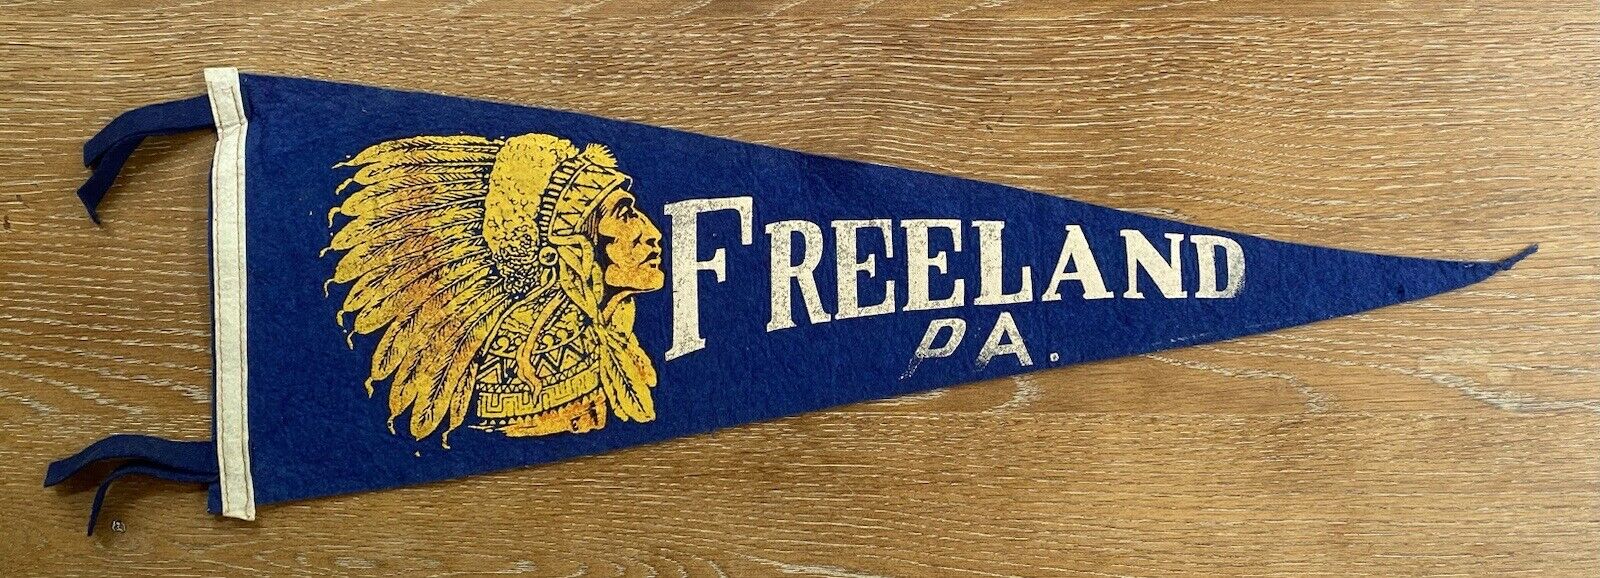 Vintage 1940's Freeland PA 26 Inch Pennant w/ Native American Chief Graphic Old